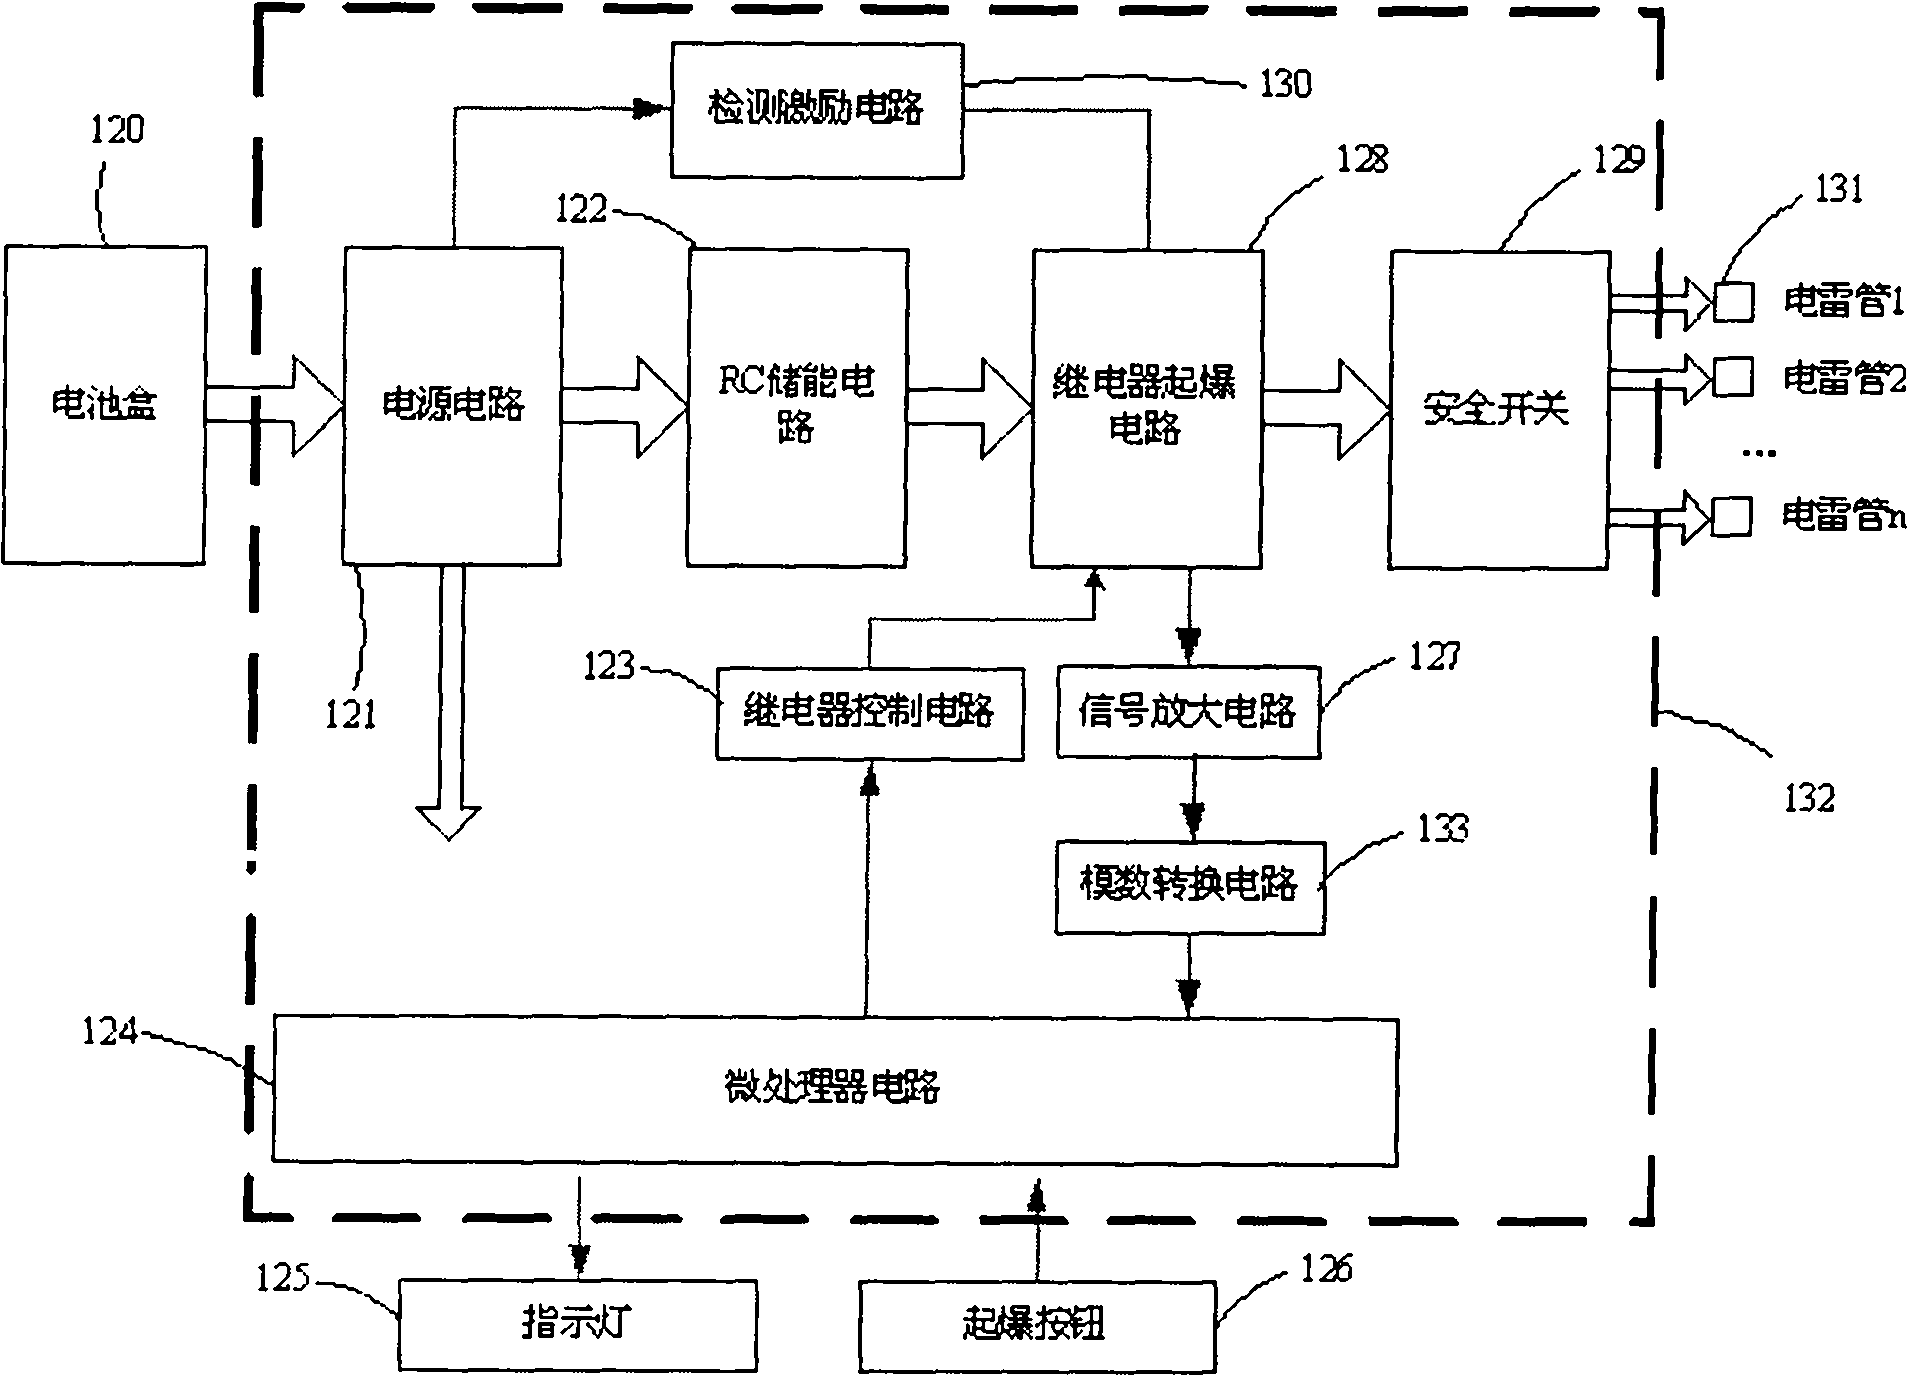 Multipath electric detonator priming device with self test and line fault test function and method